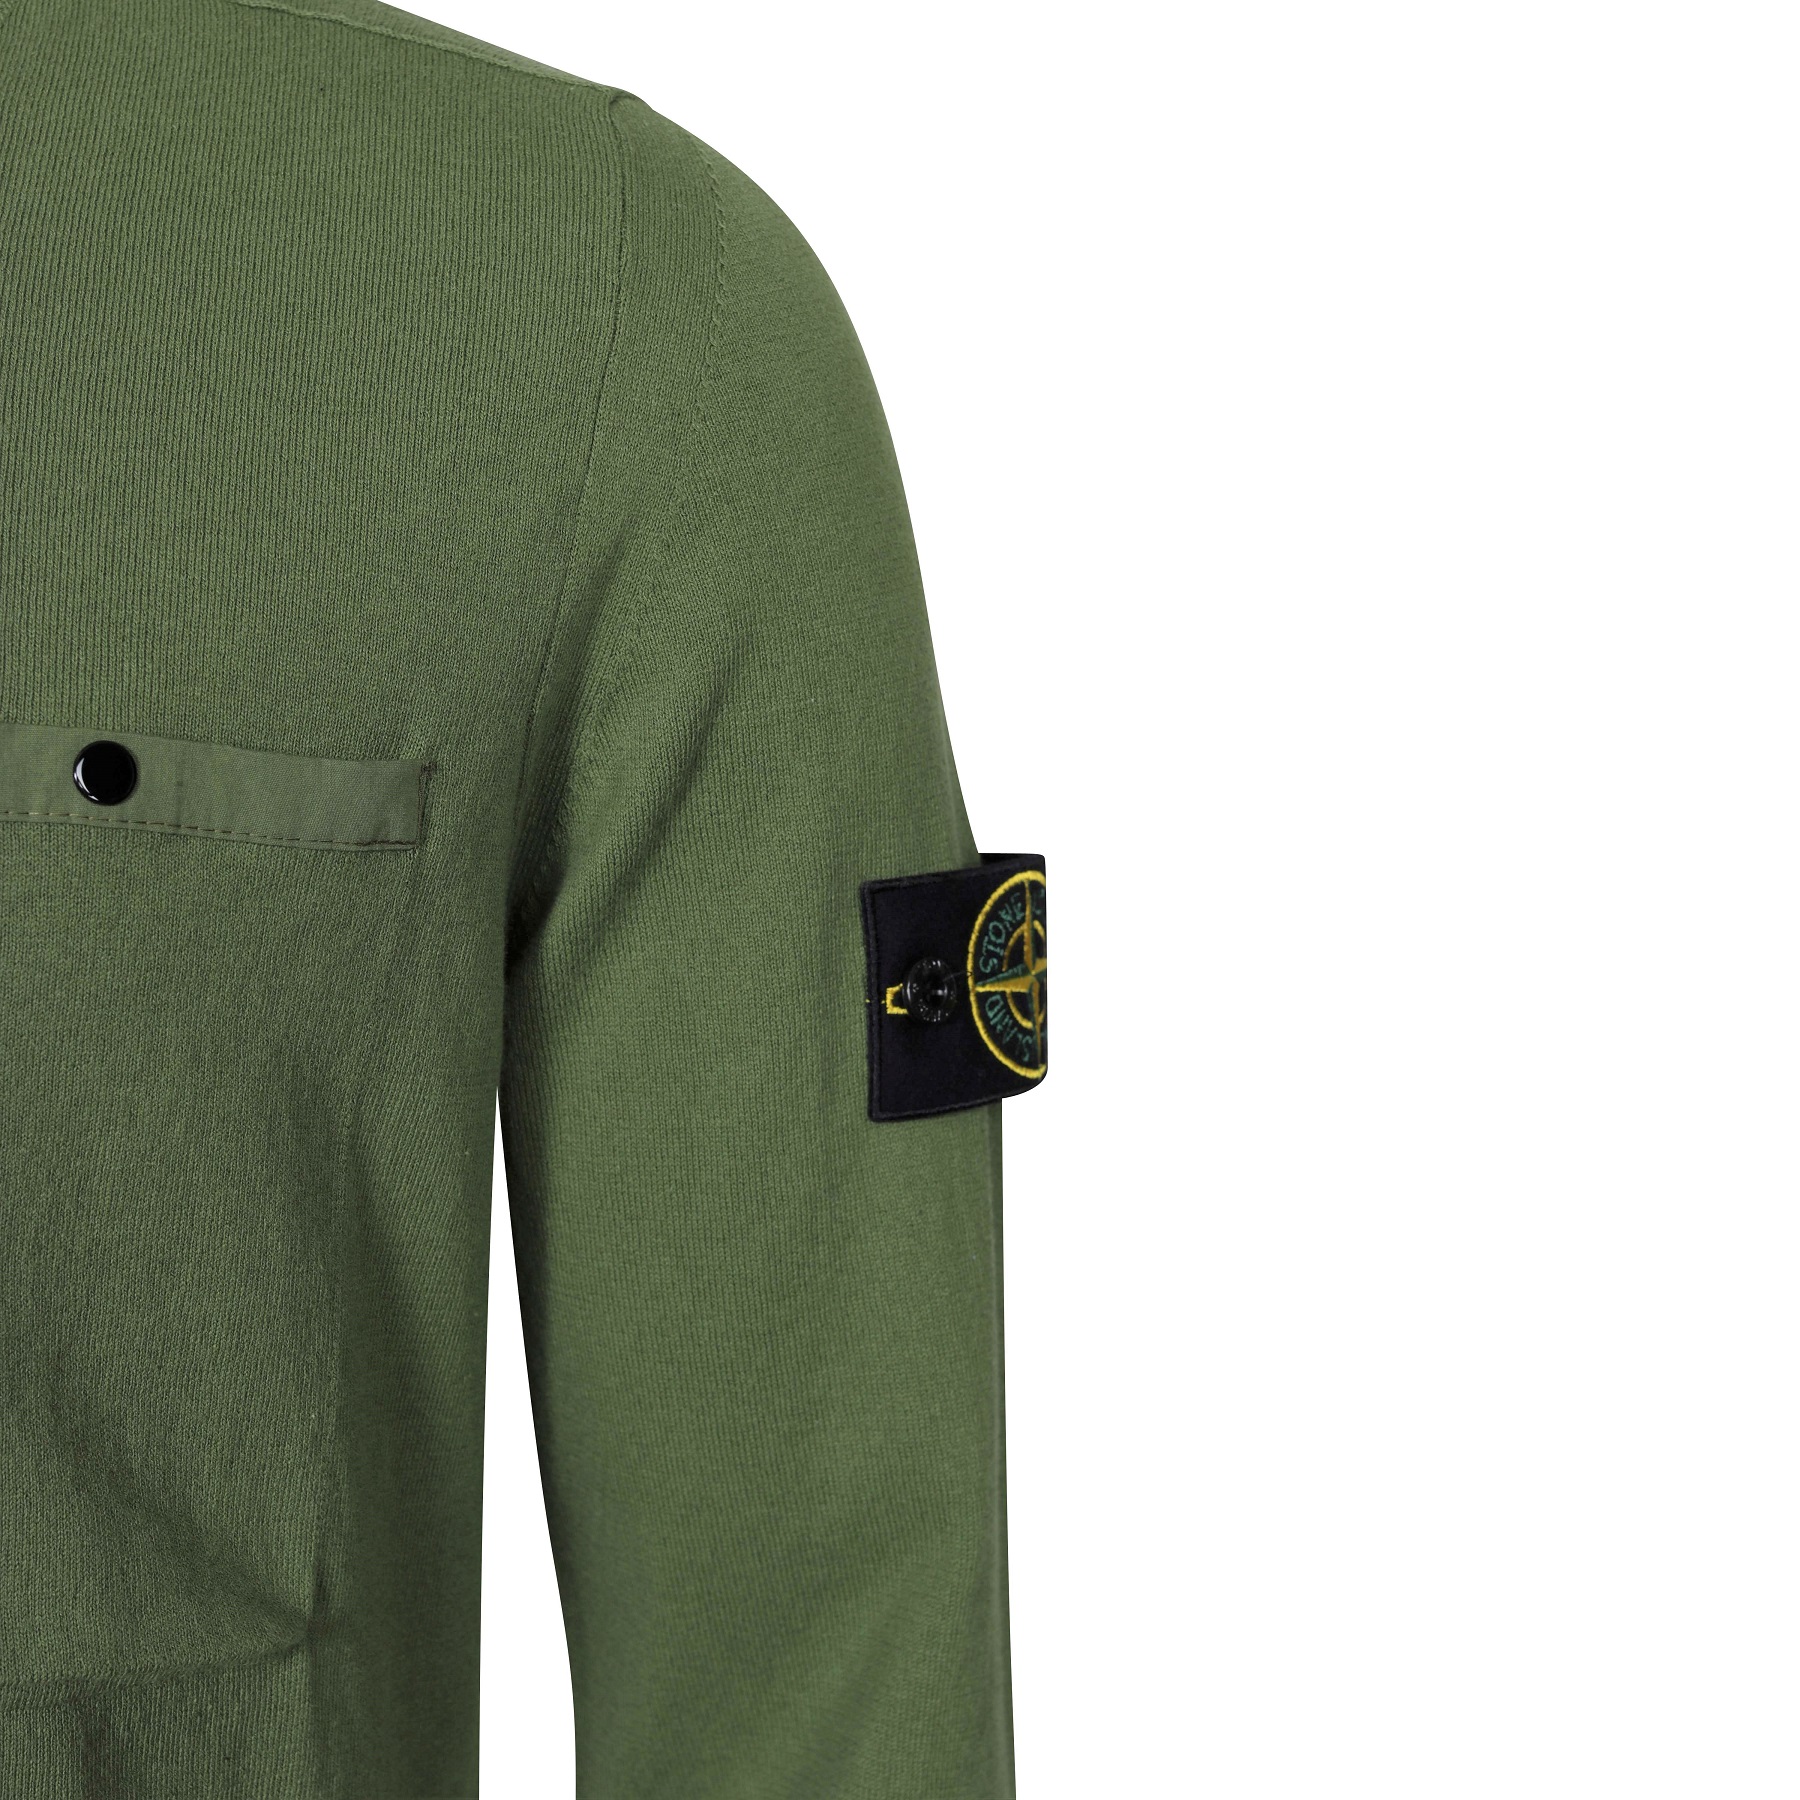 Stone Island Chest Pocket Knit Sweater in Olive  L